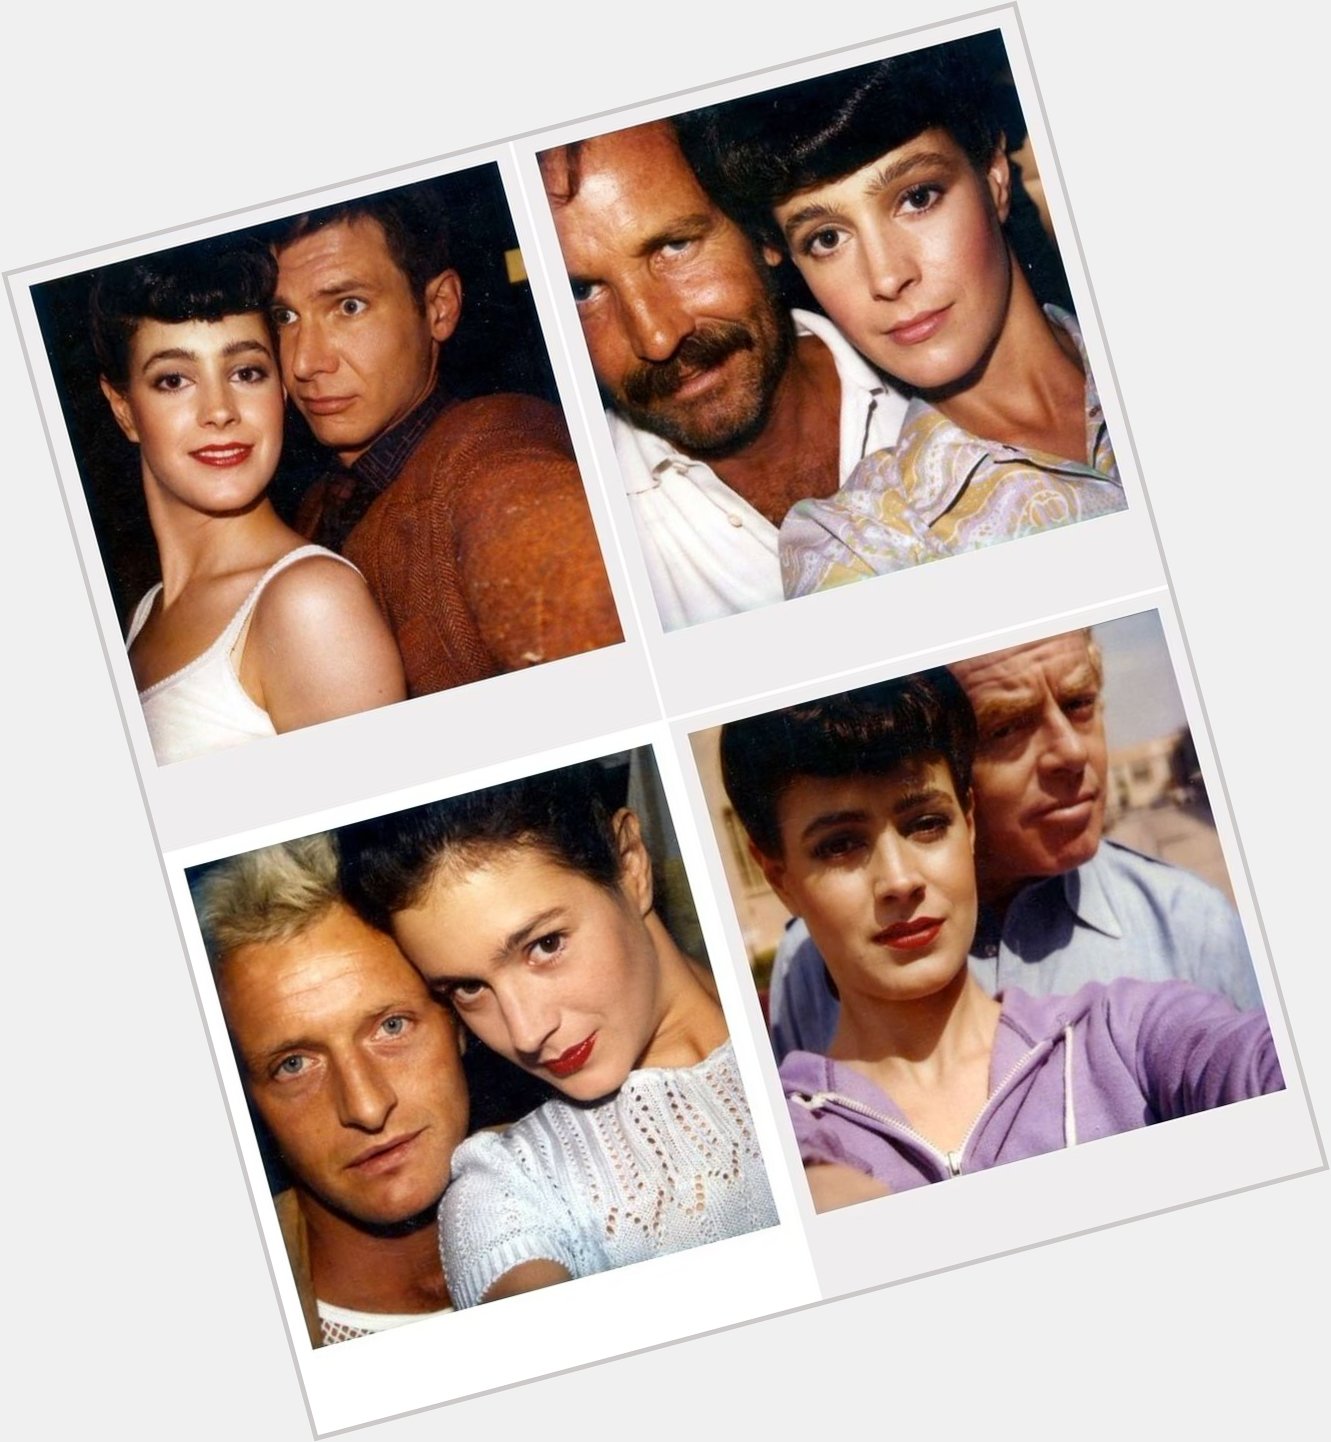 Happy birthday Sean Young, seen here in polaroids from the set of Blade Runner! 